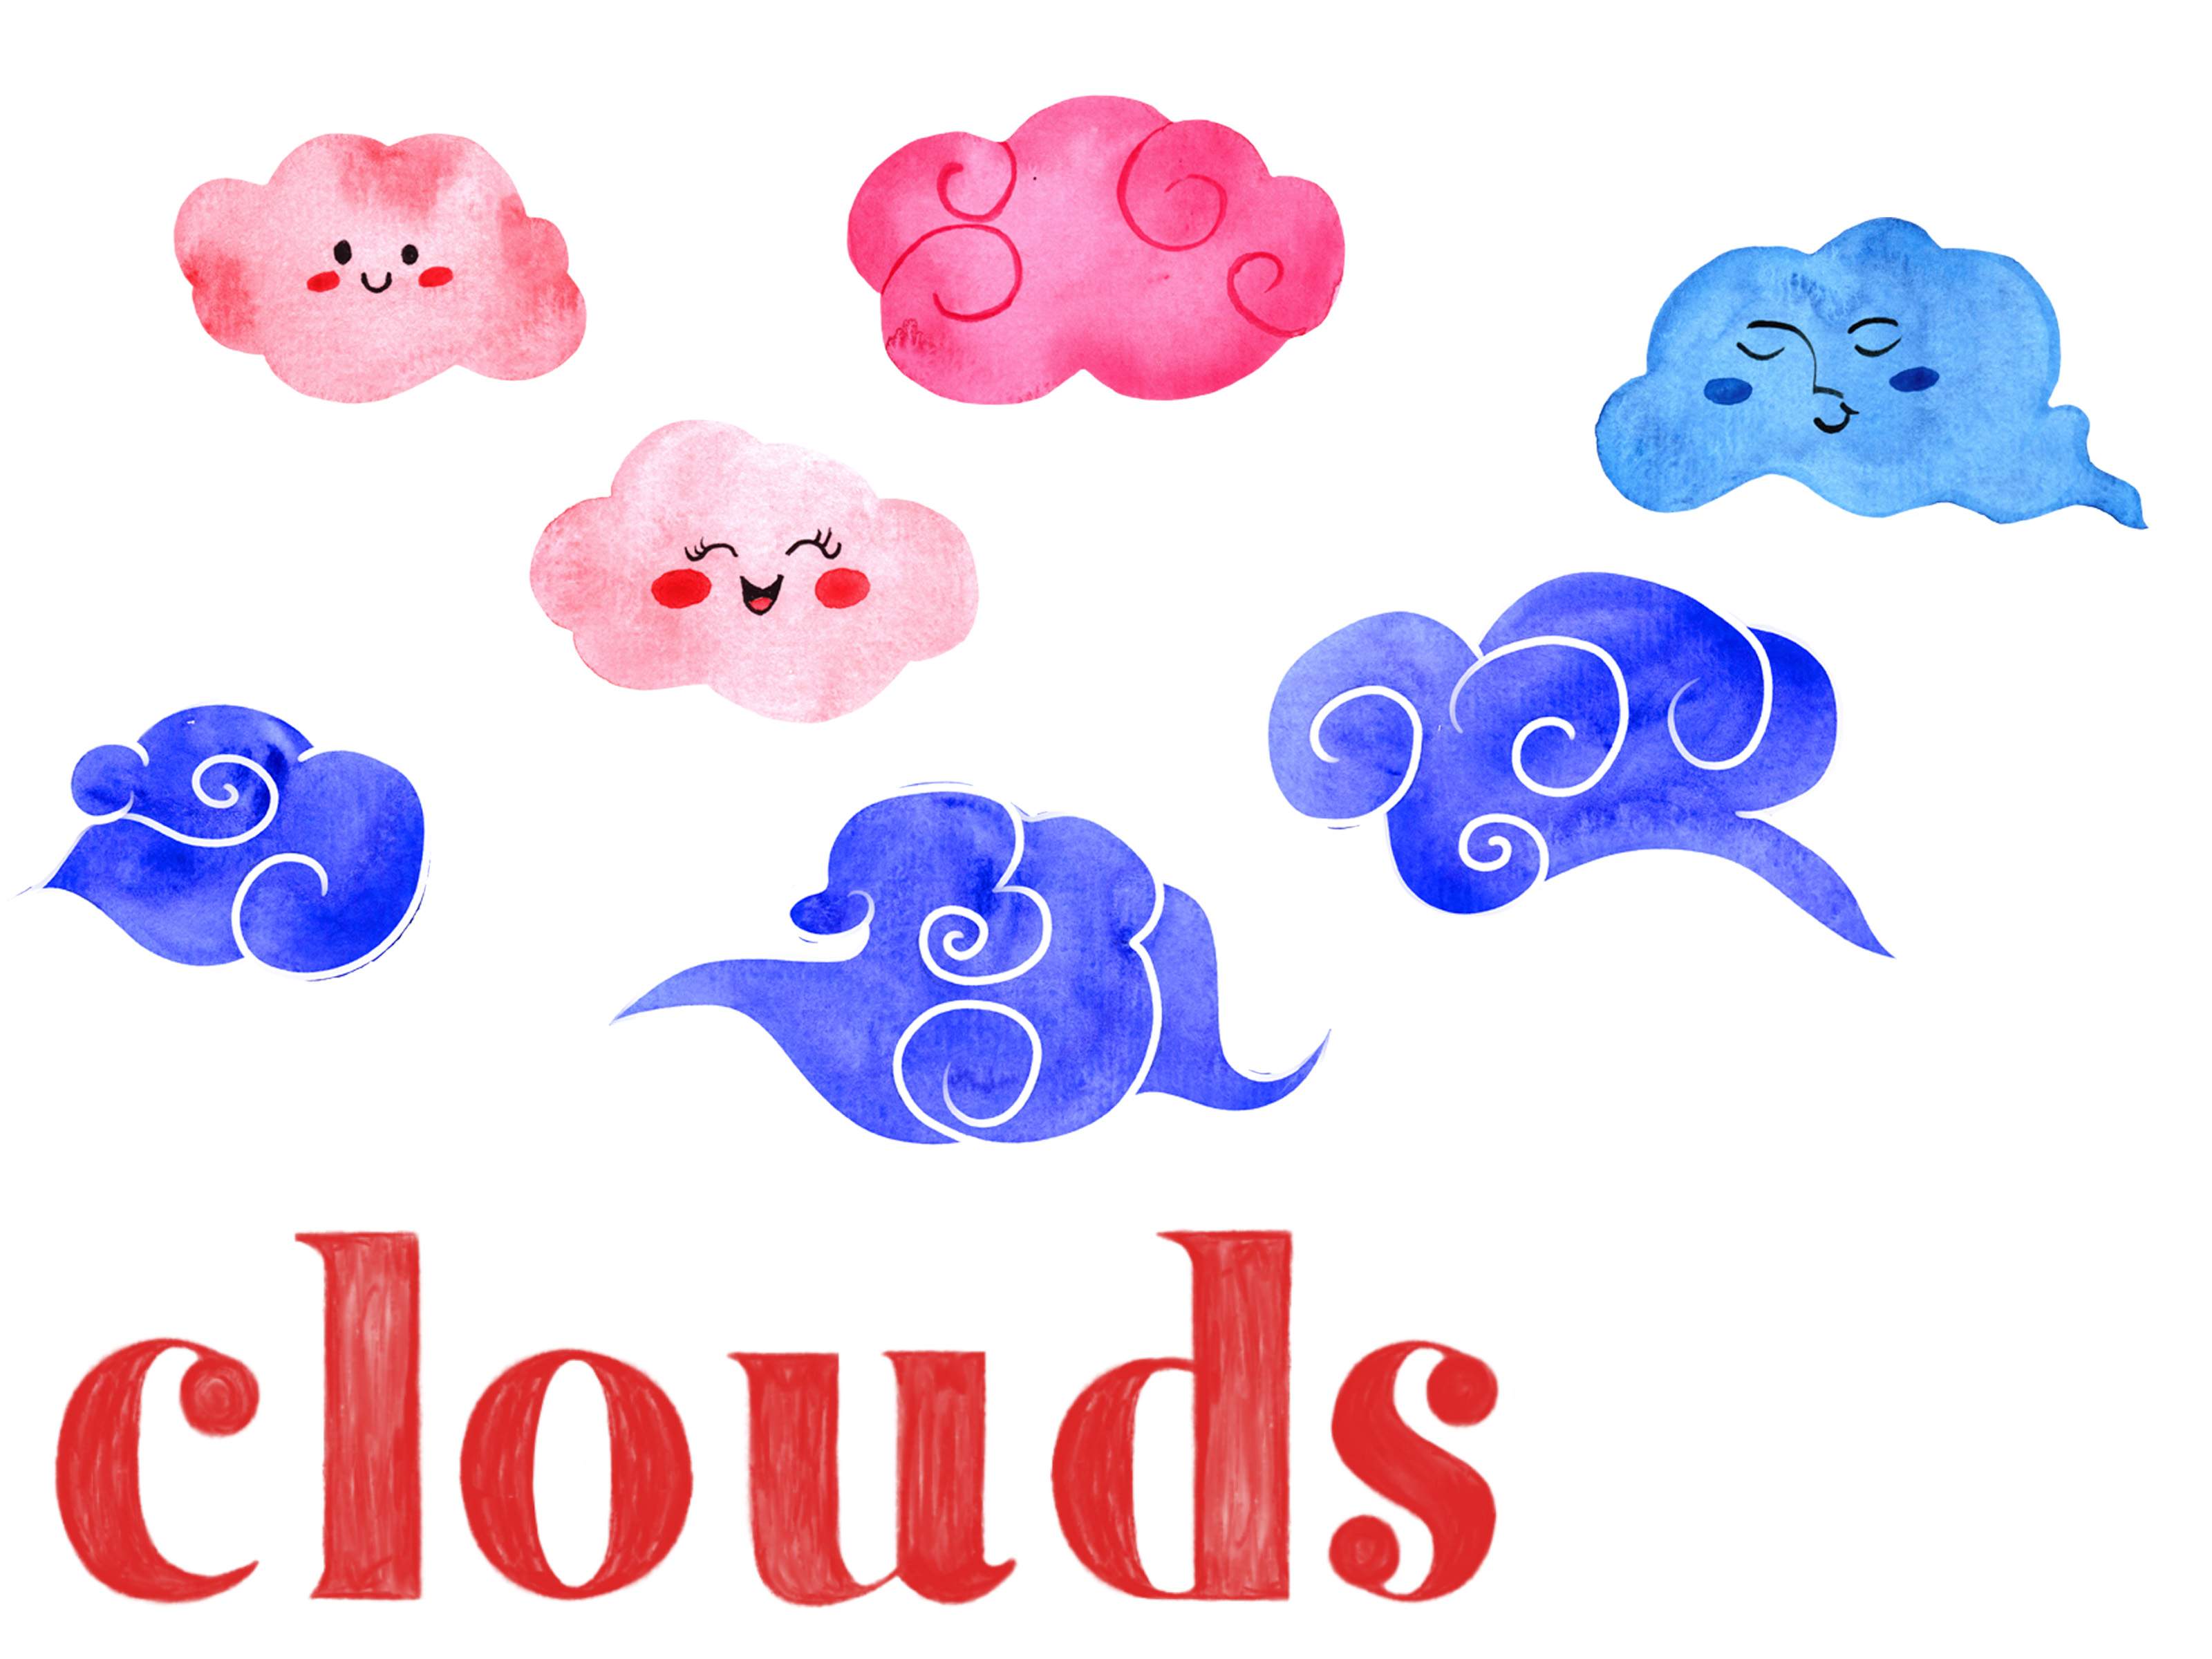 Watercolor drawing of a group of clouds.